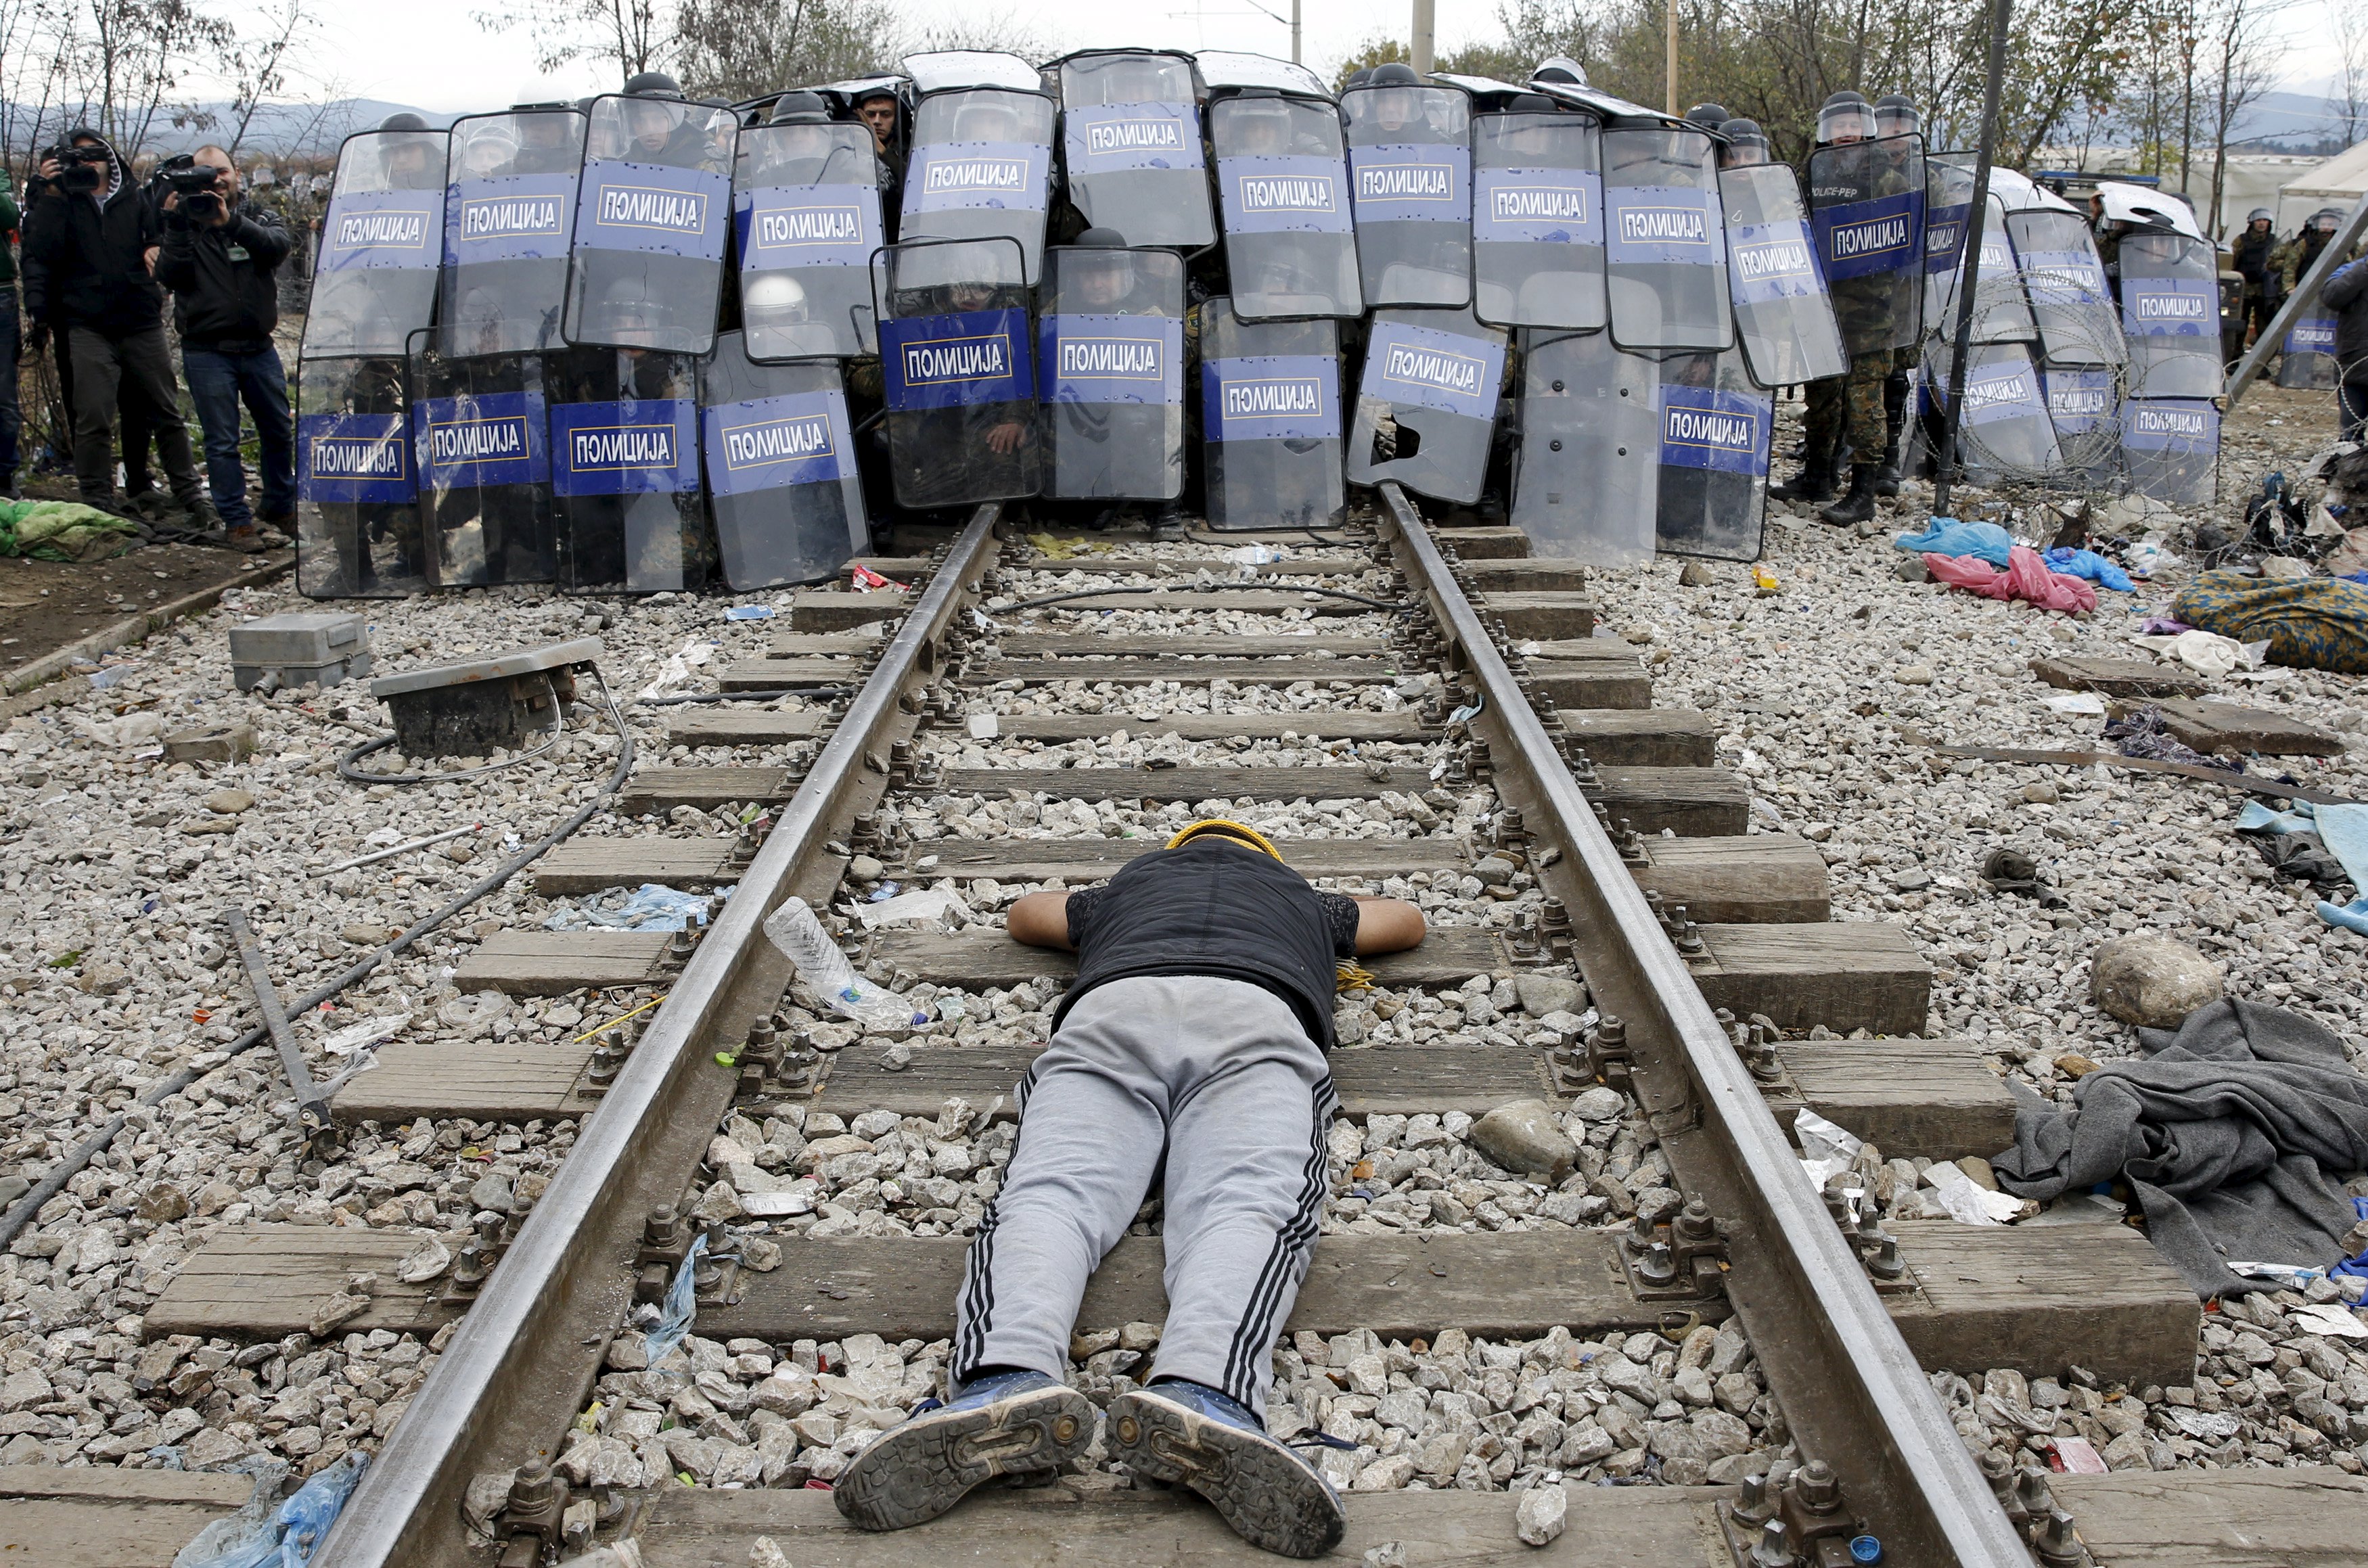 REFILE - CORRECTING REASON OF CLASHA stranded migrant lays on the rail tracks in front of a Macedonian police cordon as they clash after a migrant was injured when he climbed on top of a train wagon, near the village of Idomeni, Greece, November 28, 2015. REUTERS/Yannis Behrakis